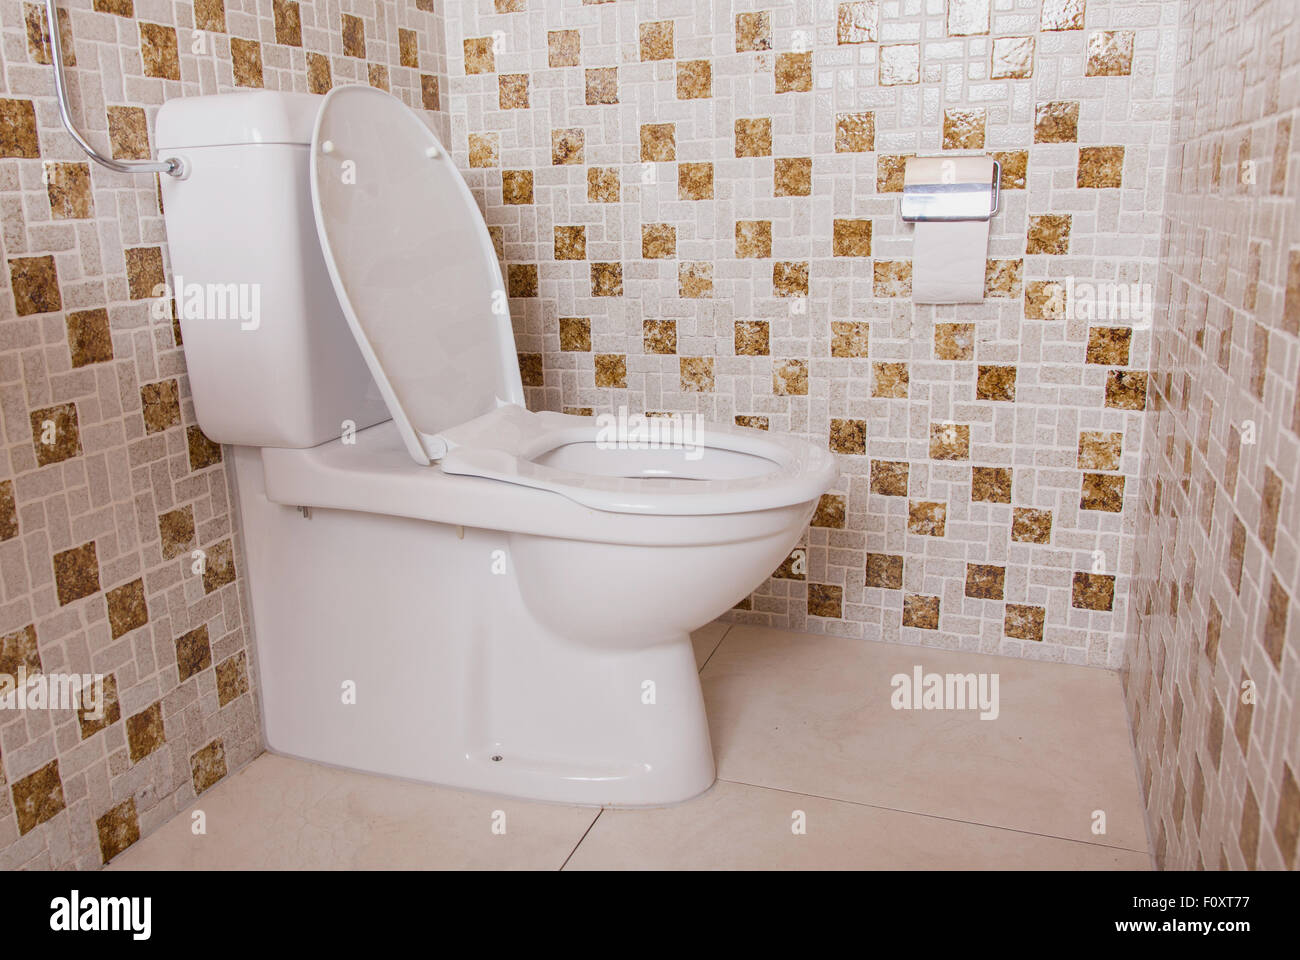 Old Clean Toilet With Old Tiles 80s Stock Photo 86641611 Alamy